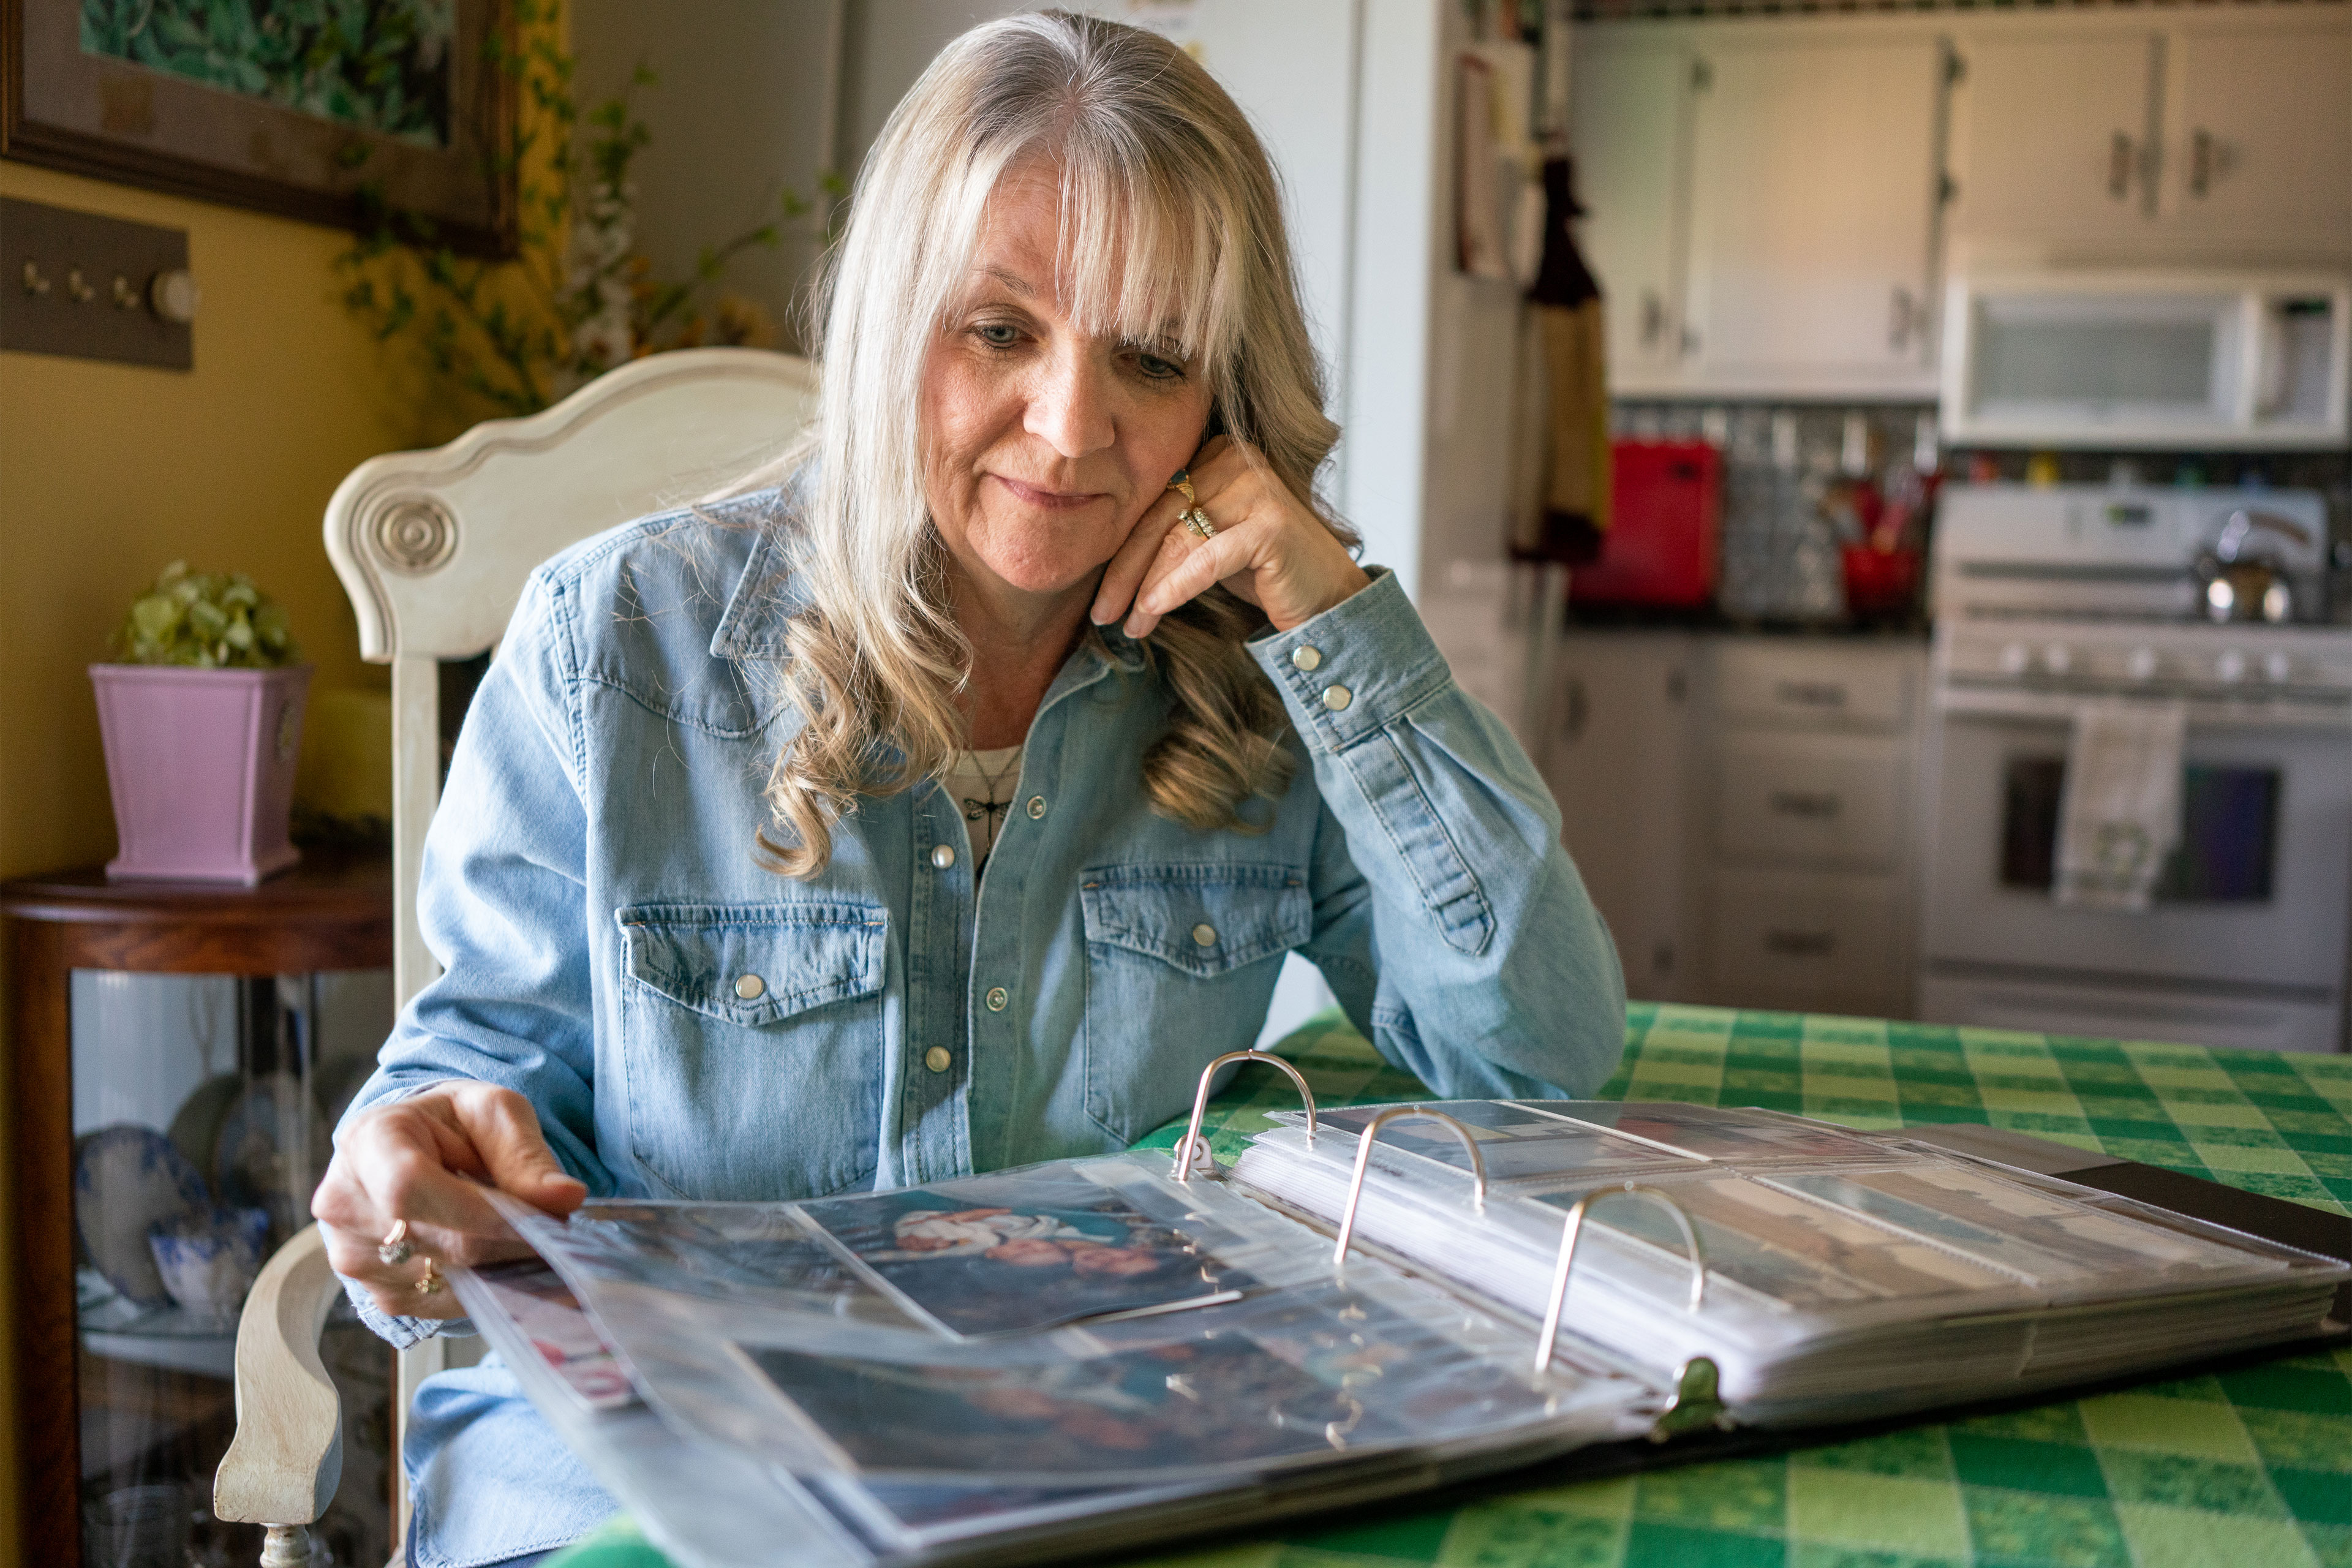 A woman sits at a kitchen table, the stove in the background, her gaze peering down at a photo album. She has light hair and is wearing a light blue denim shirt. The photos in the album appear to be of young children.